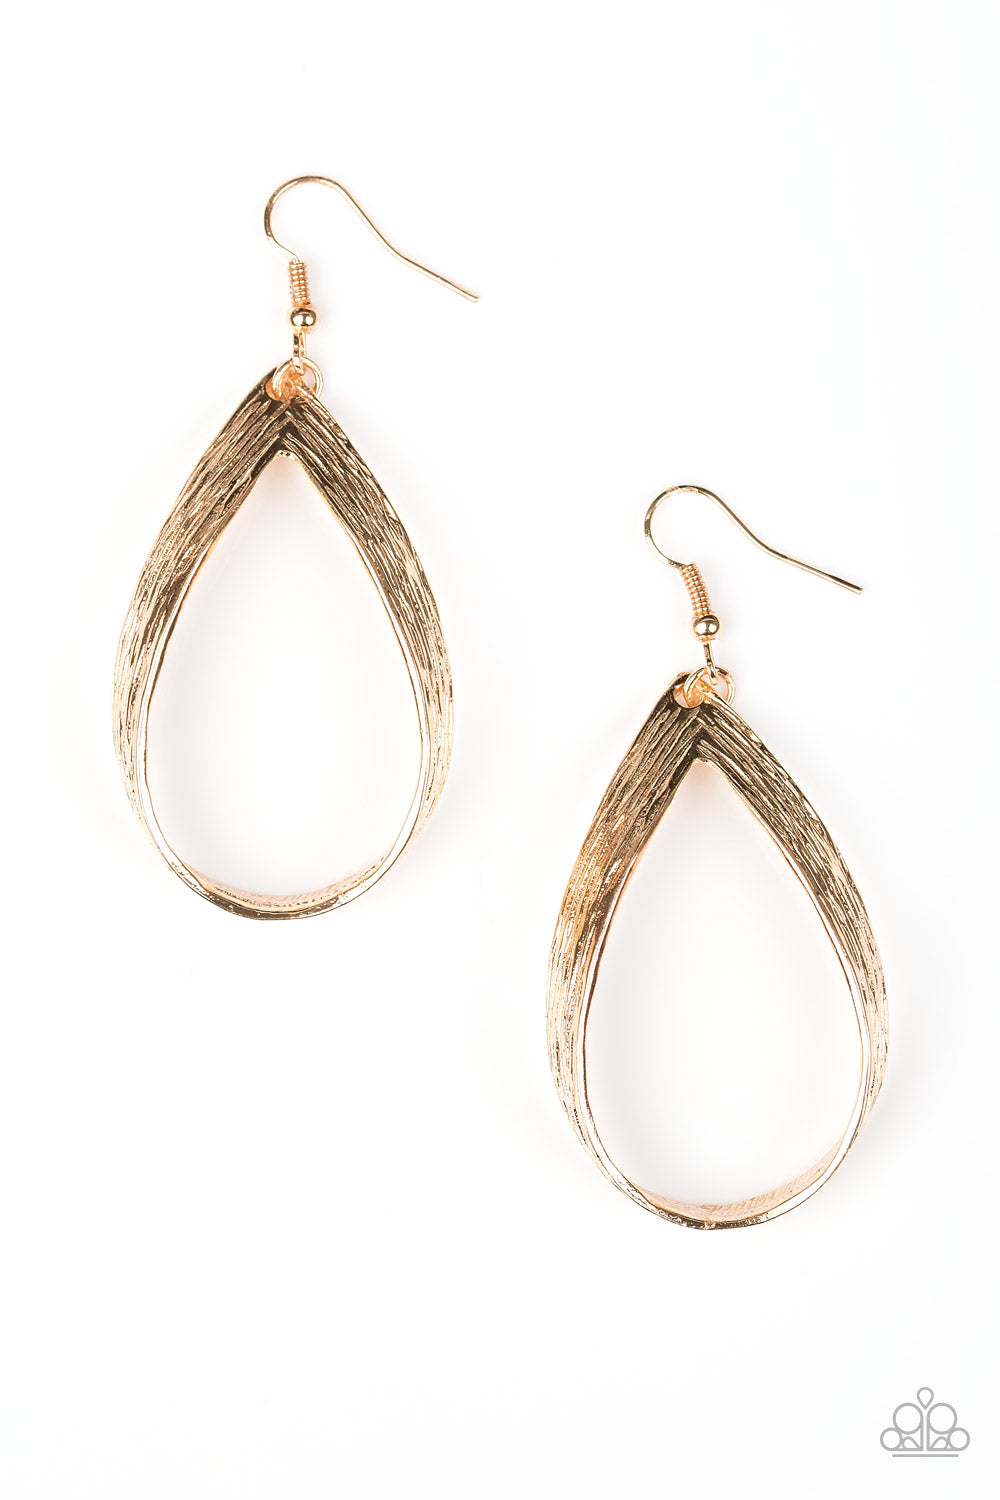 Come Reign or Shine Gold-Earrings